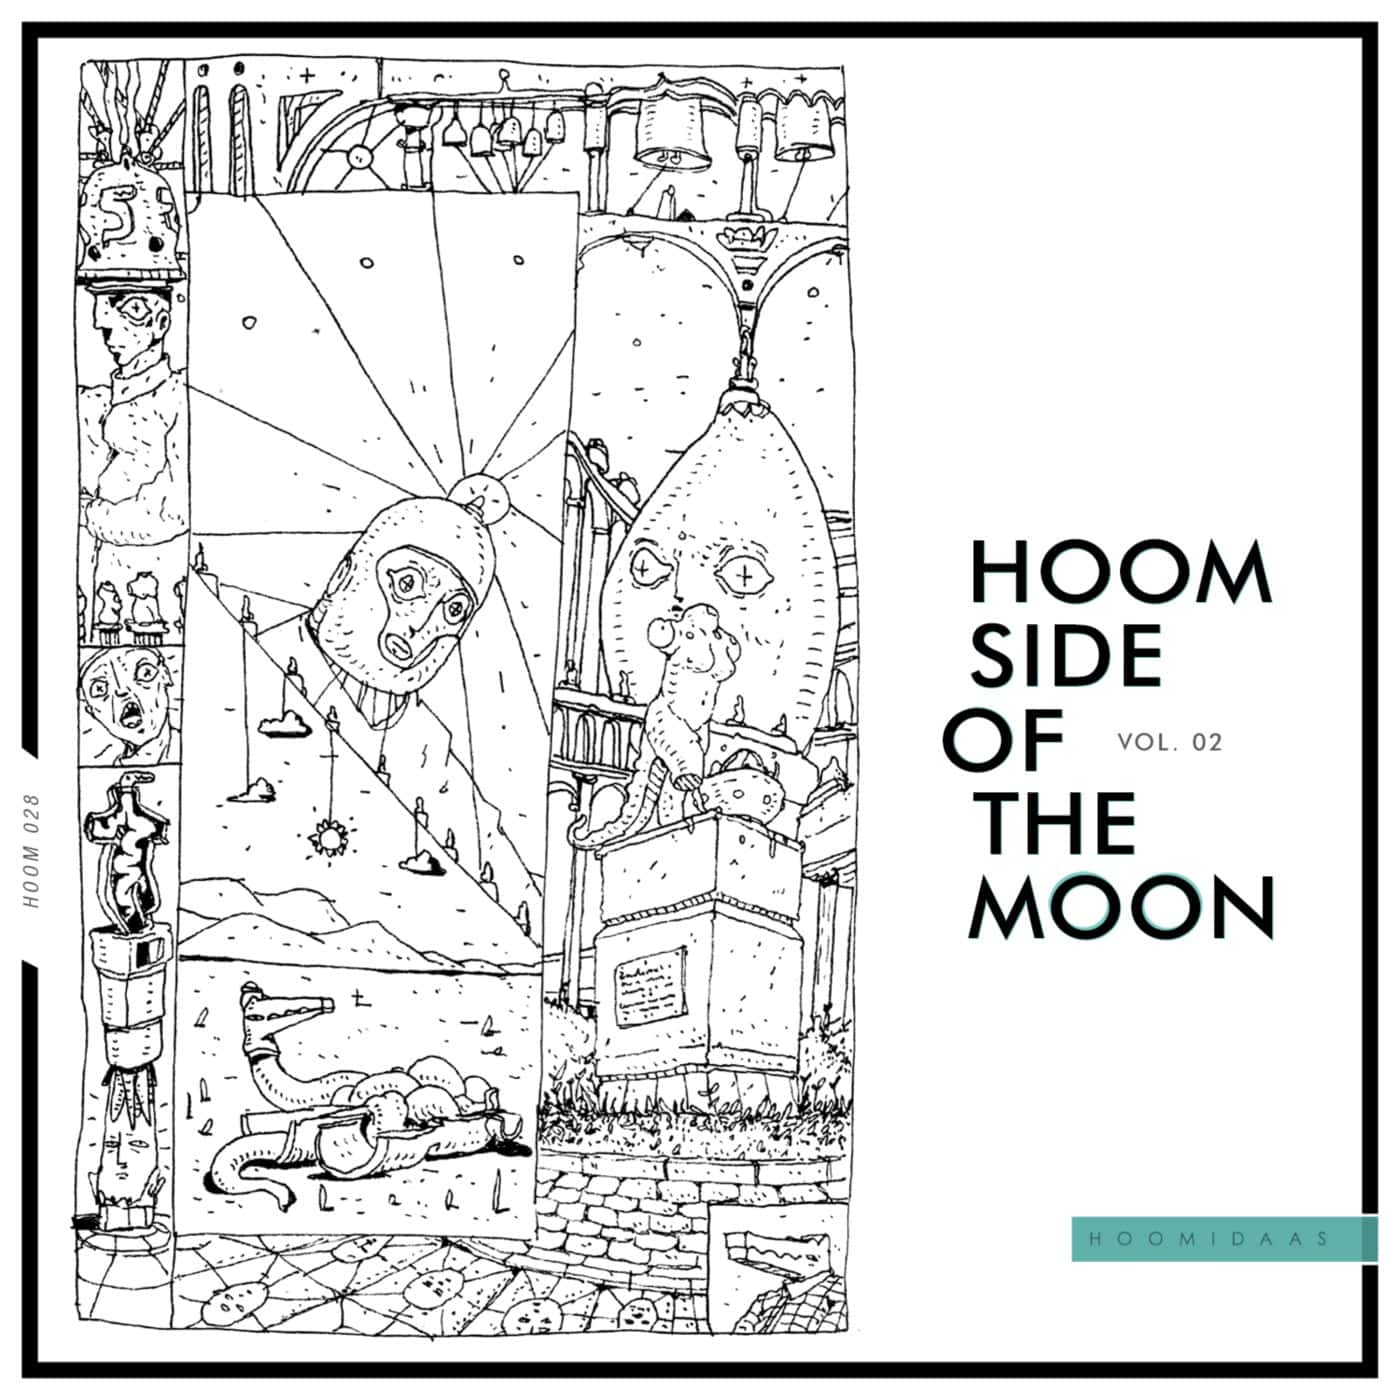 Download Hoom Side of the Moon, Vol. 02 on Electrobuzz